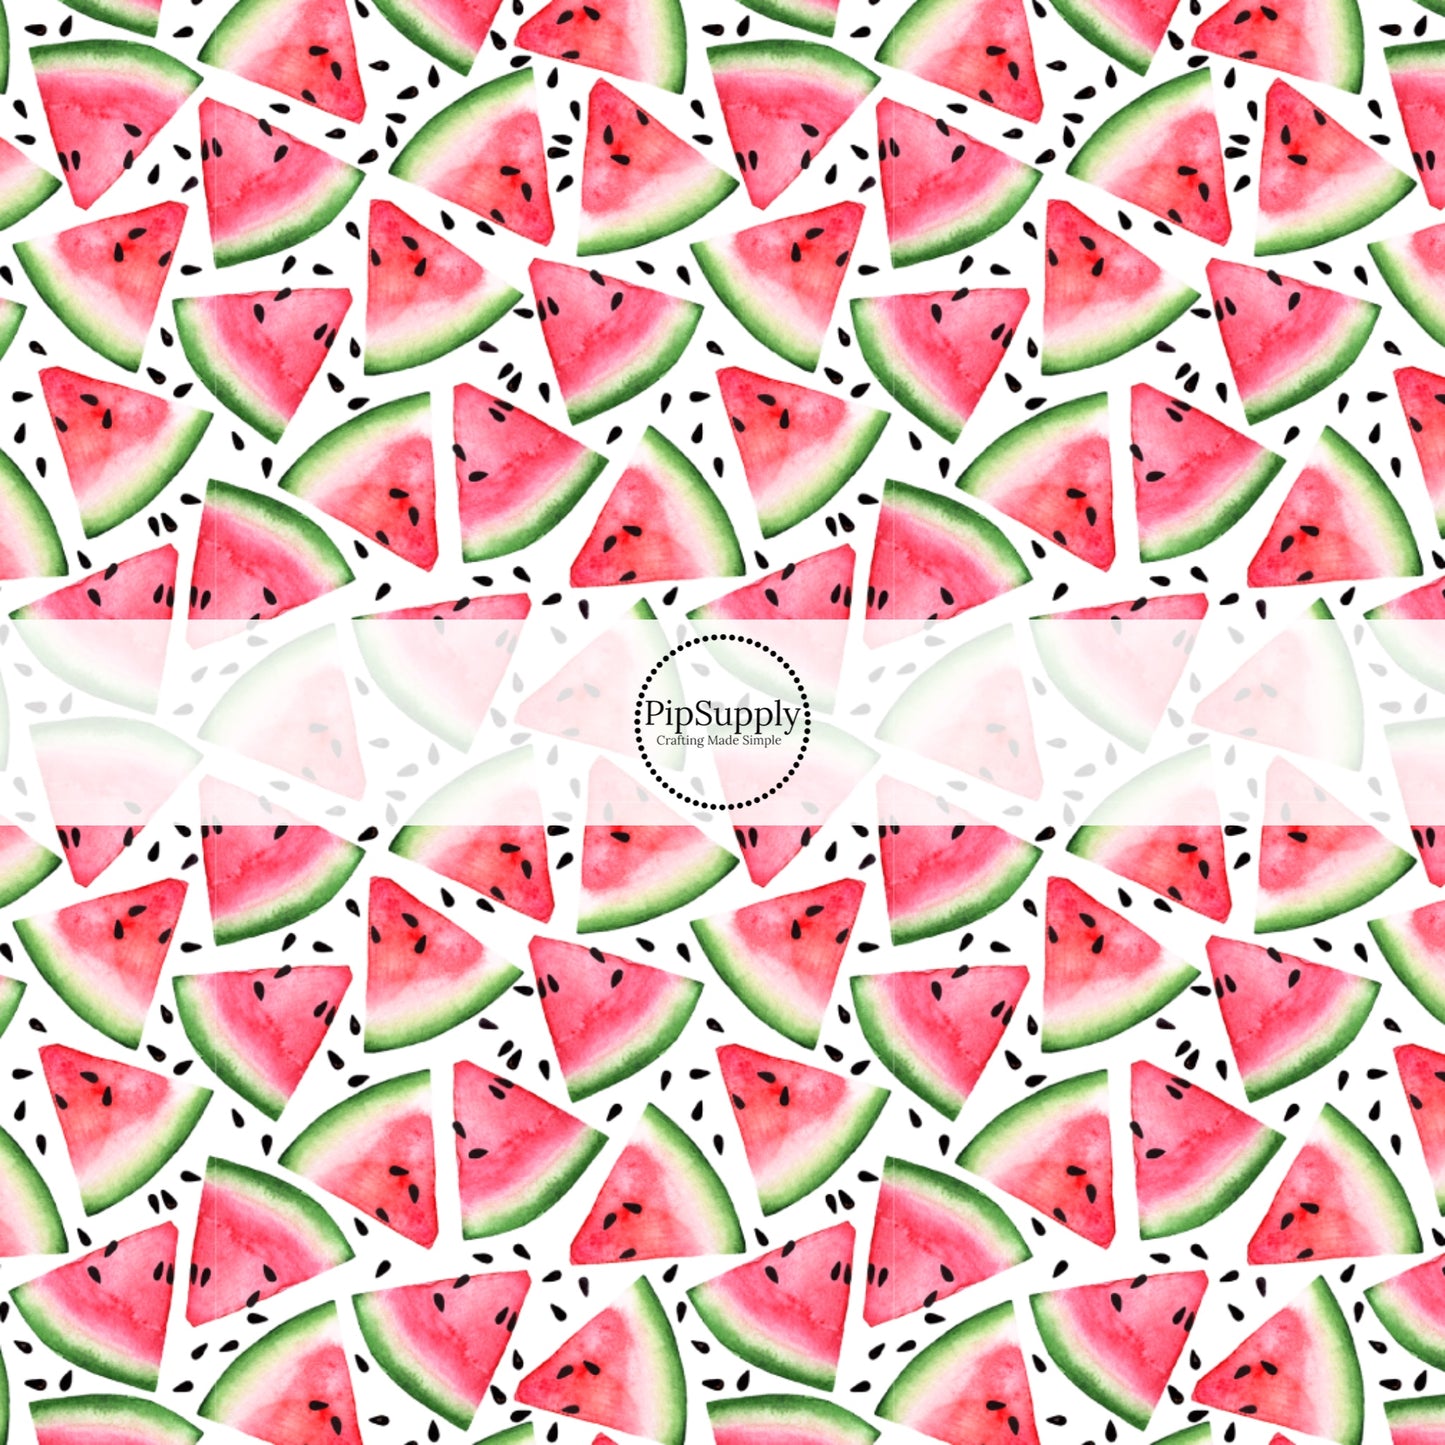 This fruit fabric by the yard features watermelon slices and watermelon seeds. This fun fruit fabric can be used for all your sewing and crafting needs!